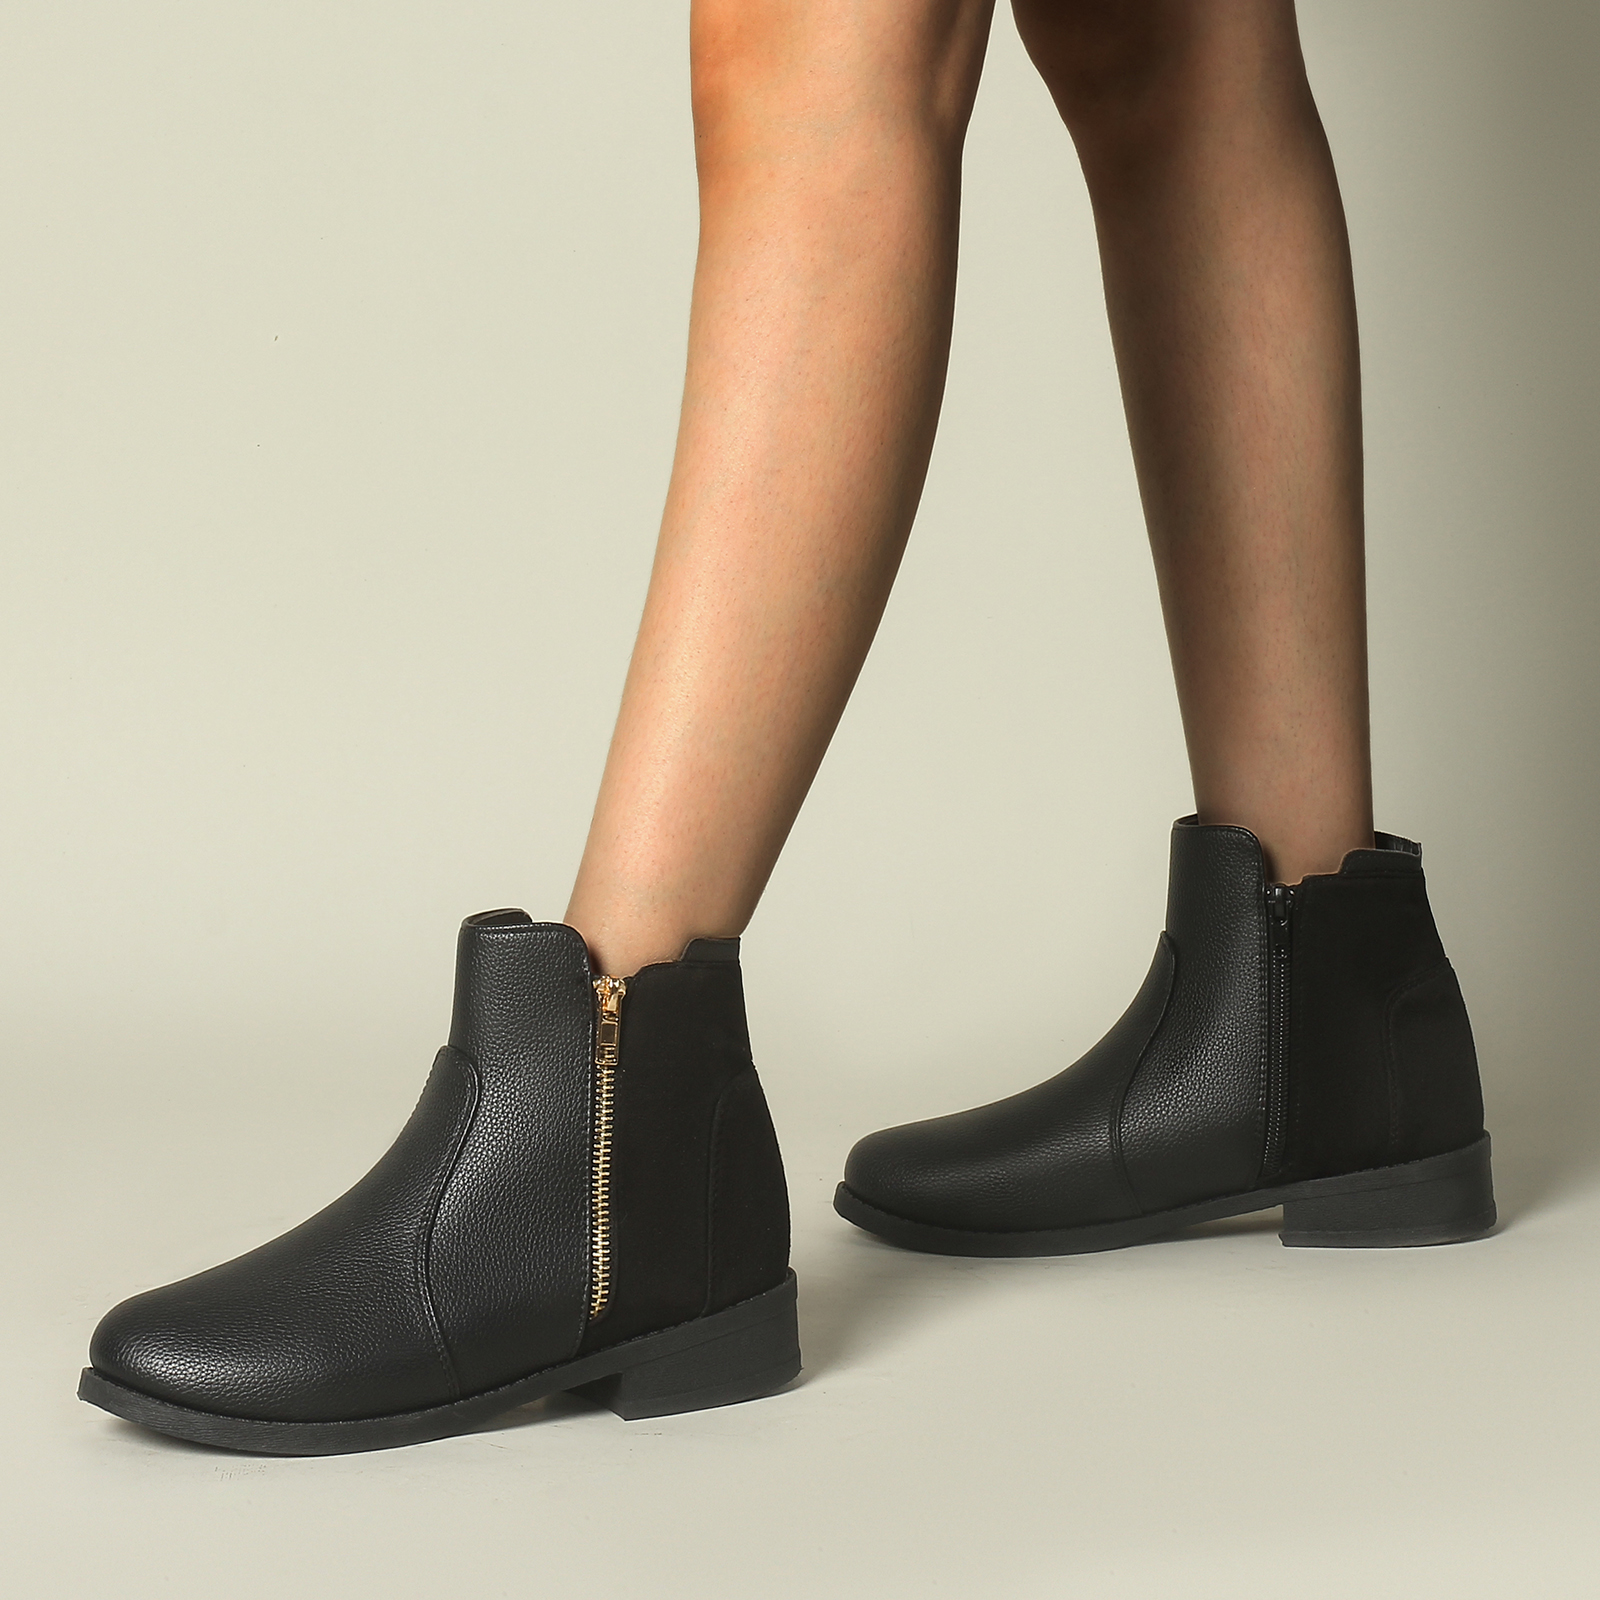 MUSSHOE Ankle Boots with Side Zipper